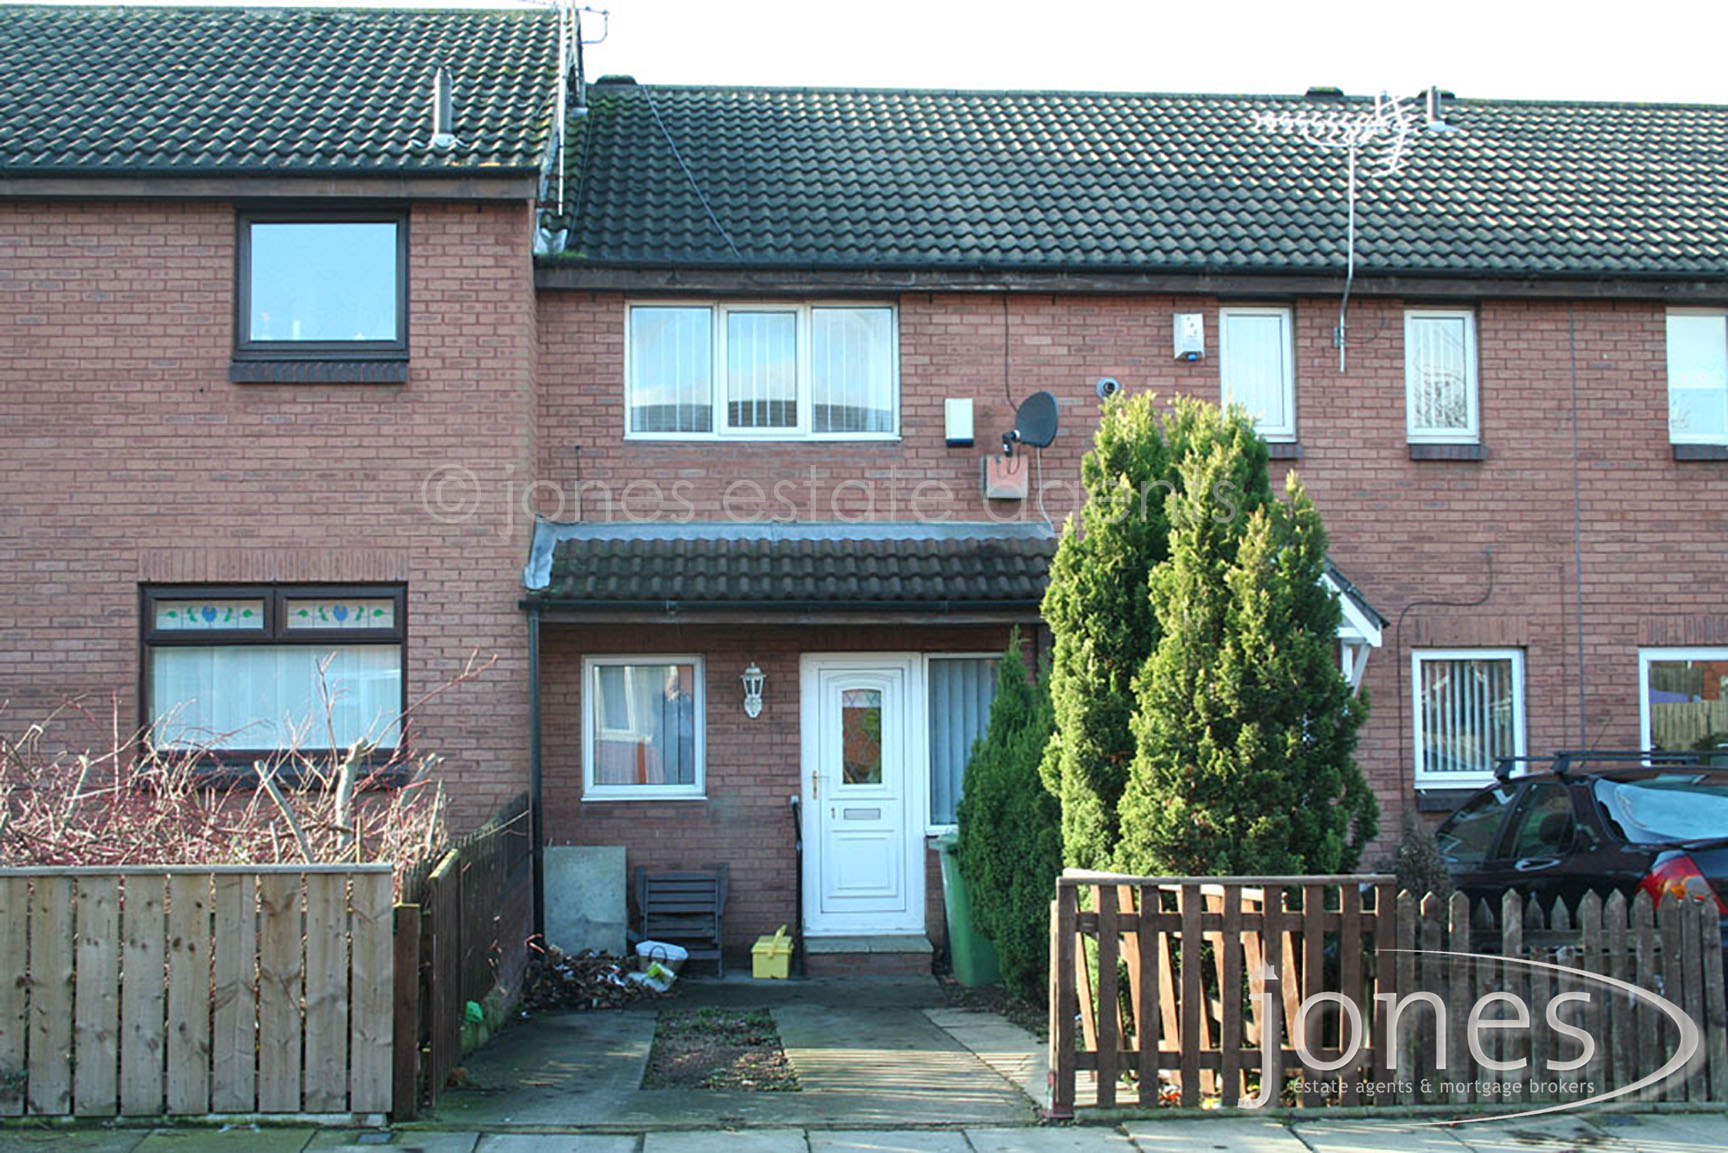 Home for Sale Let - Photo 01 Cuthbert Close, Thornaby, on Tees, TS17 6PJ